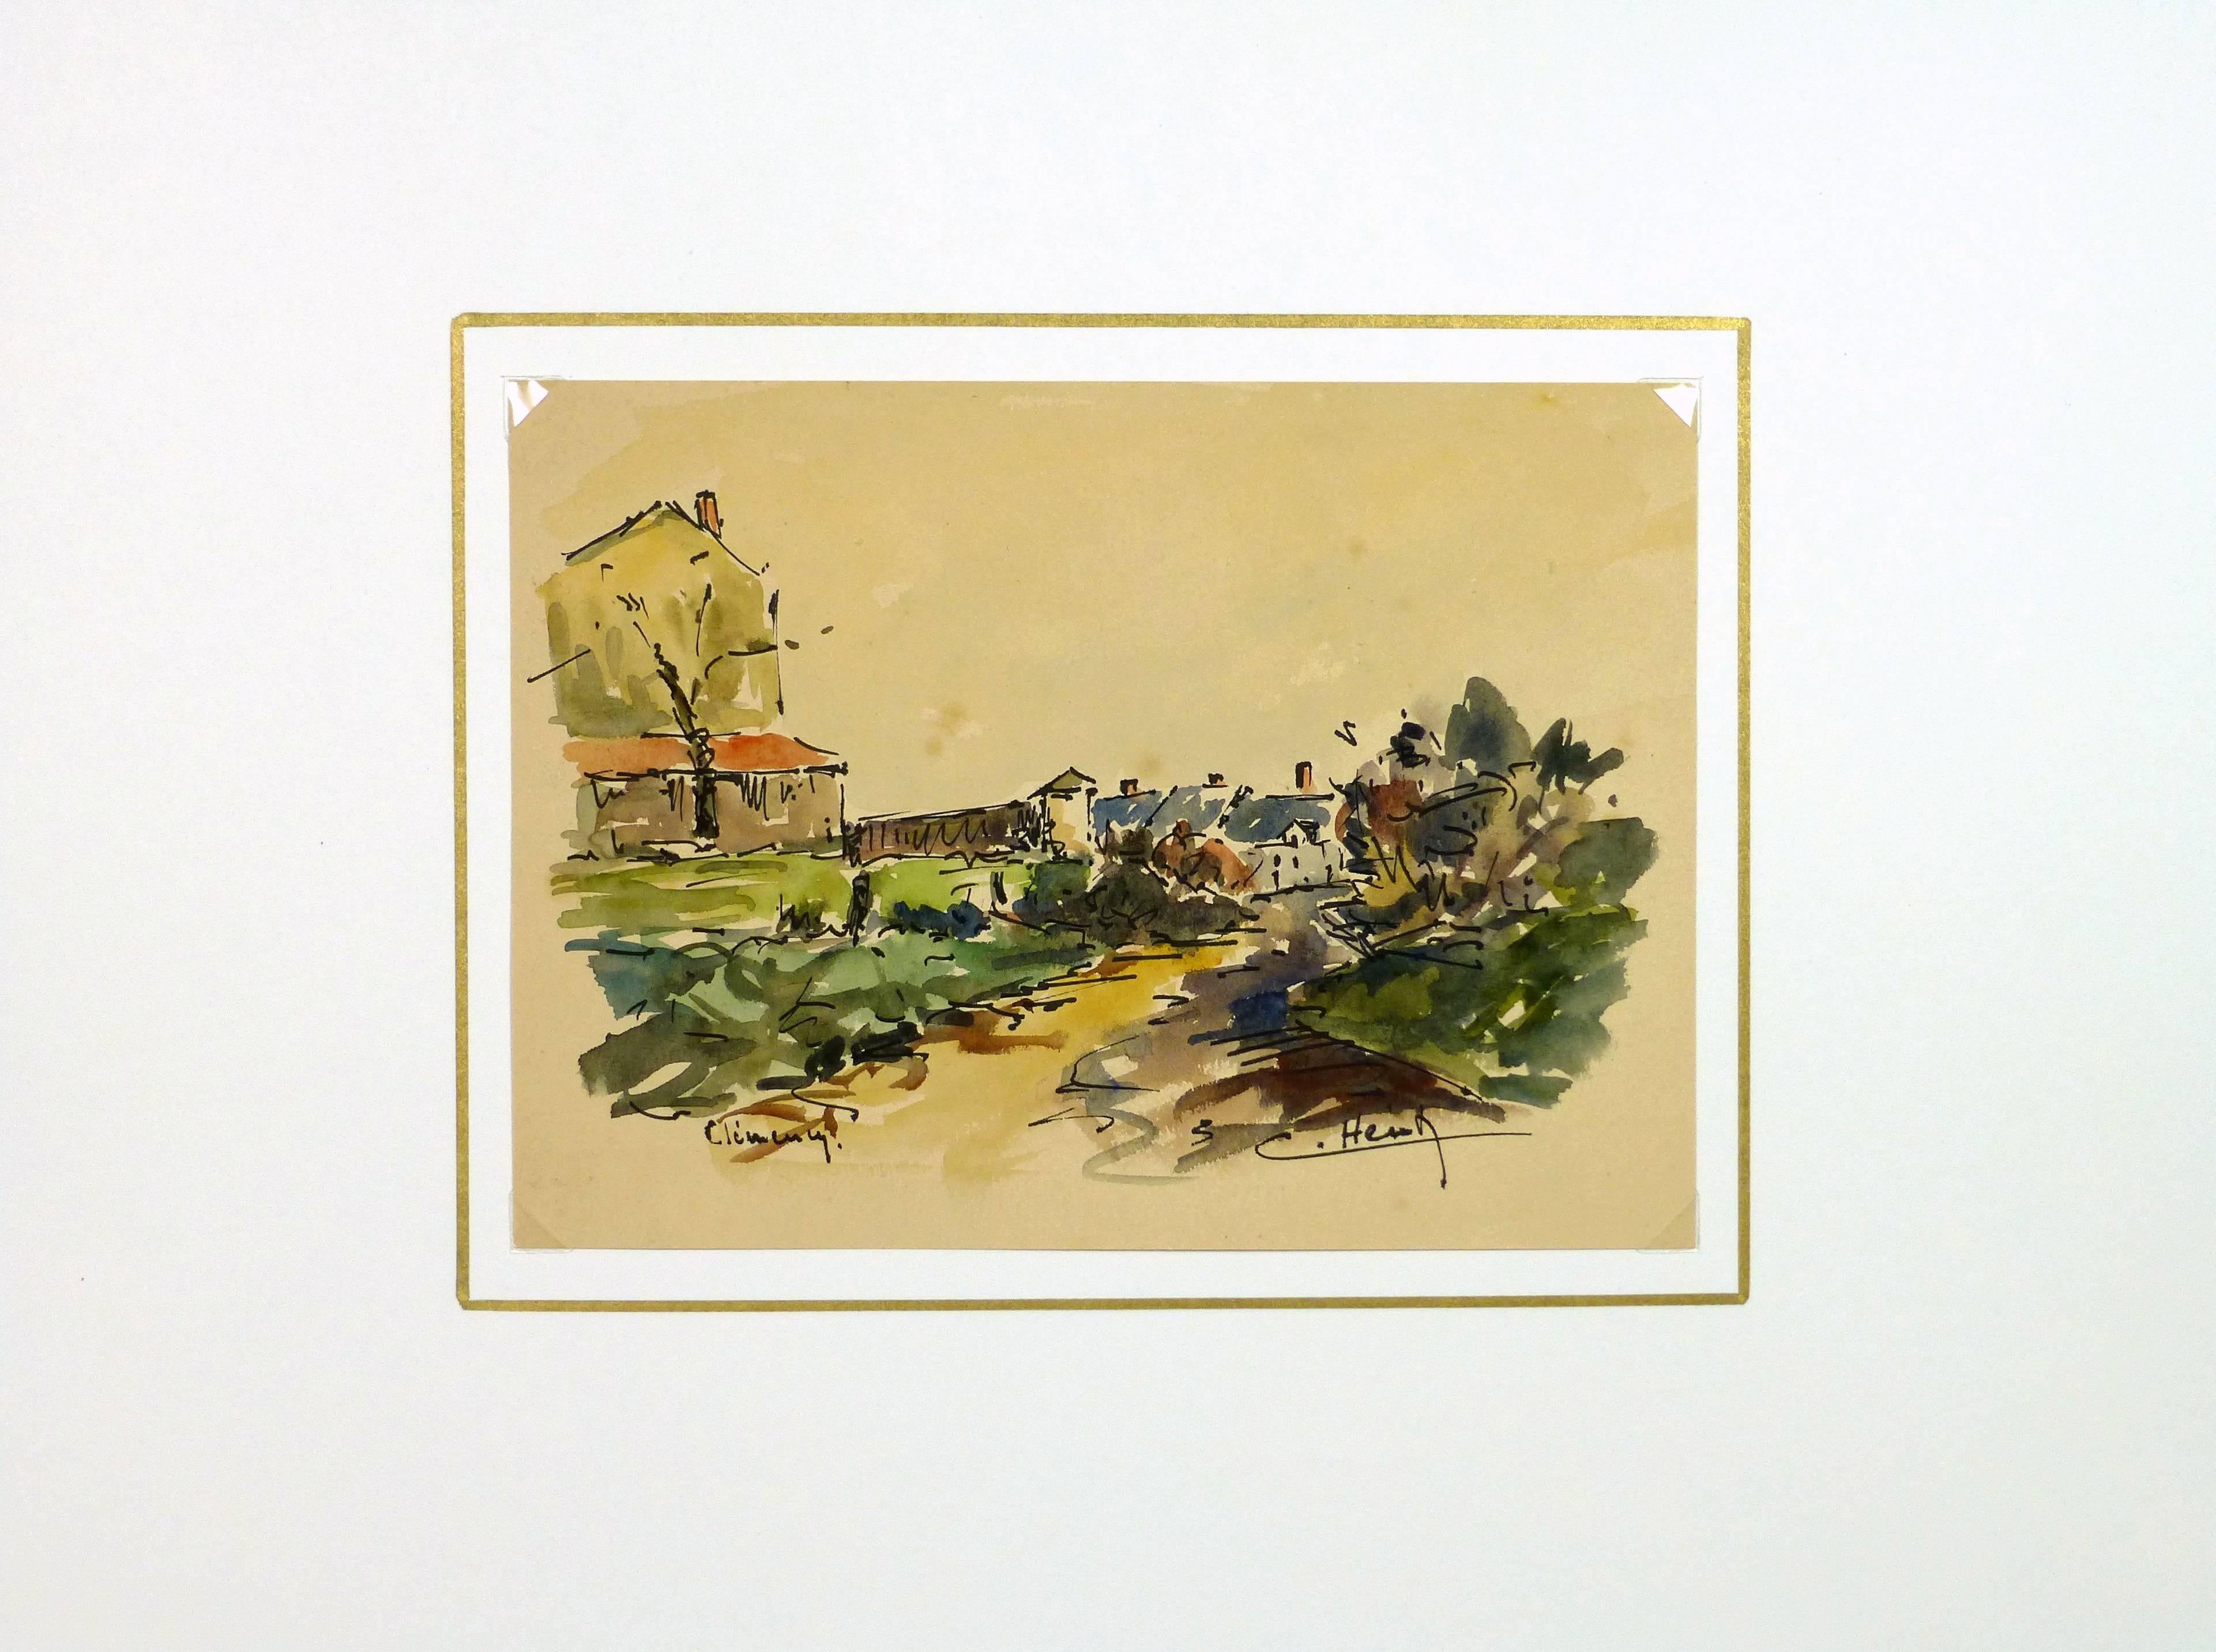 Delightful mid-century watercolor of a country path leading to the village by artist C. Heintz, circa 1950. Signed lower right.

Original artwork on paper displayed on a white mat with a gold border. Mat fits a standard-sized frame. Archival plastic